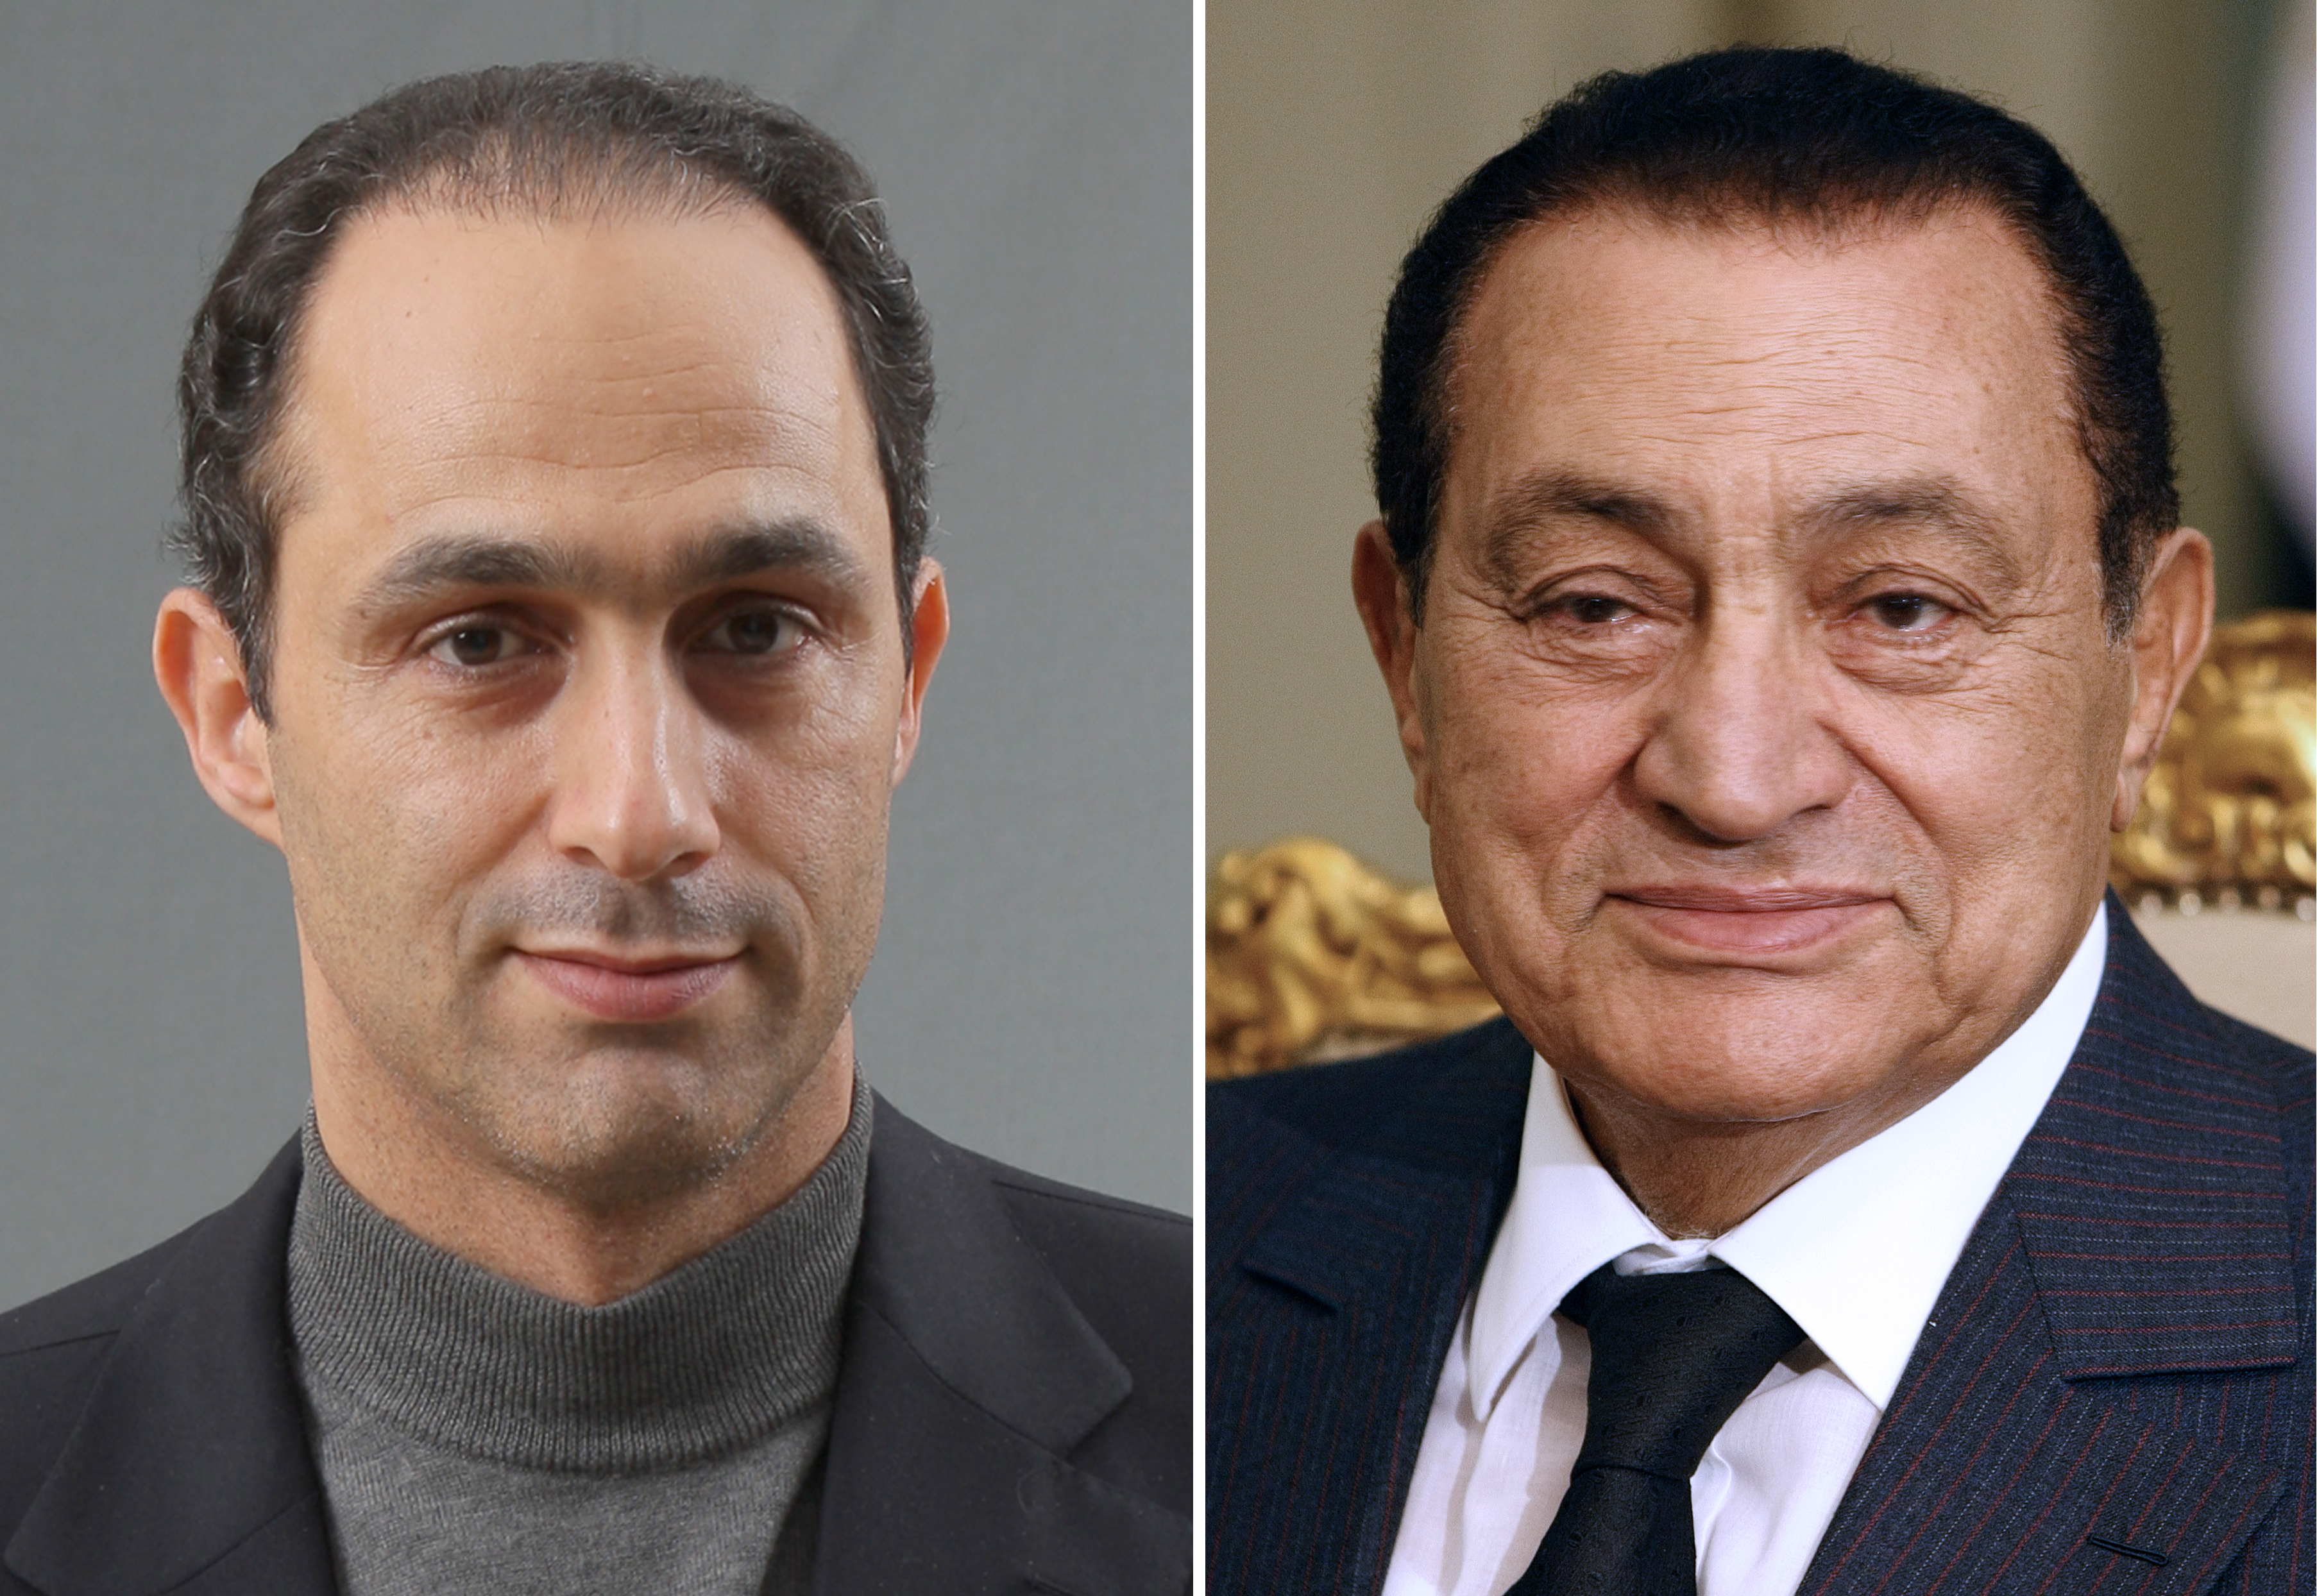 A composite image of Gamal Mubarak, the head of the higher political committee of the National Democratic Party (NDP), and his father, President Hosni Mubarak of Egypt, both c. 2008.